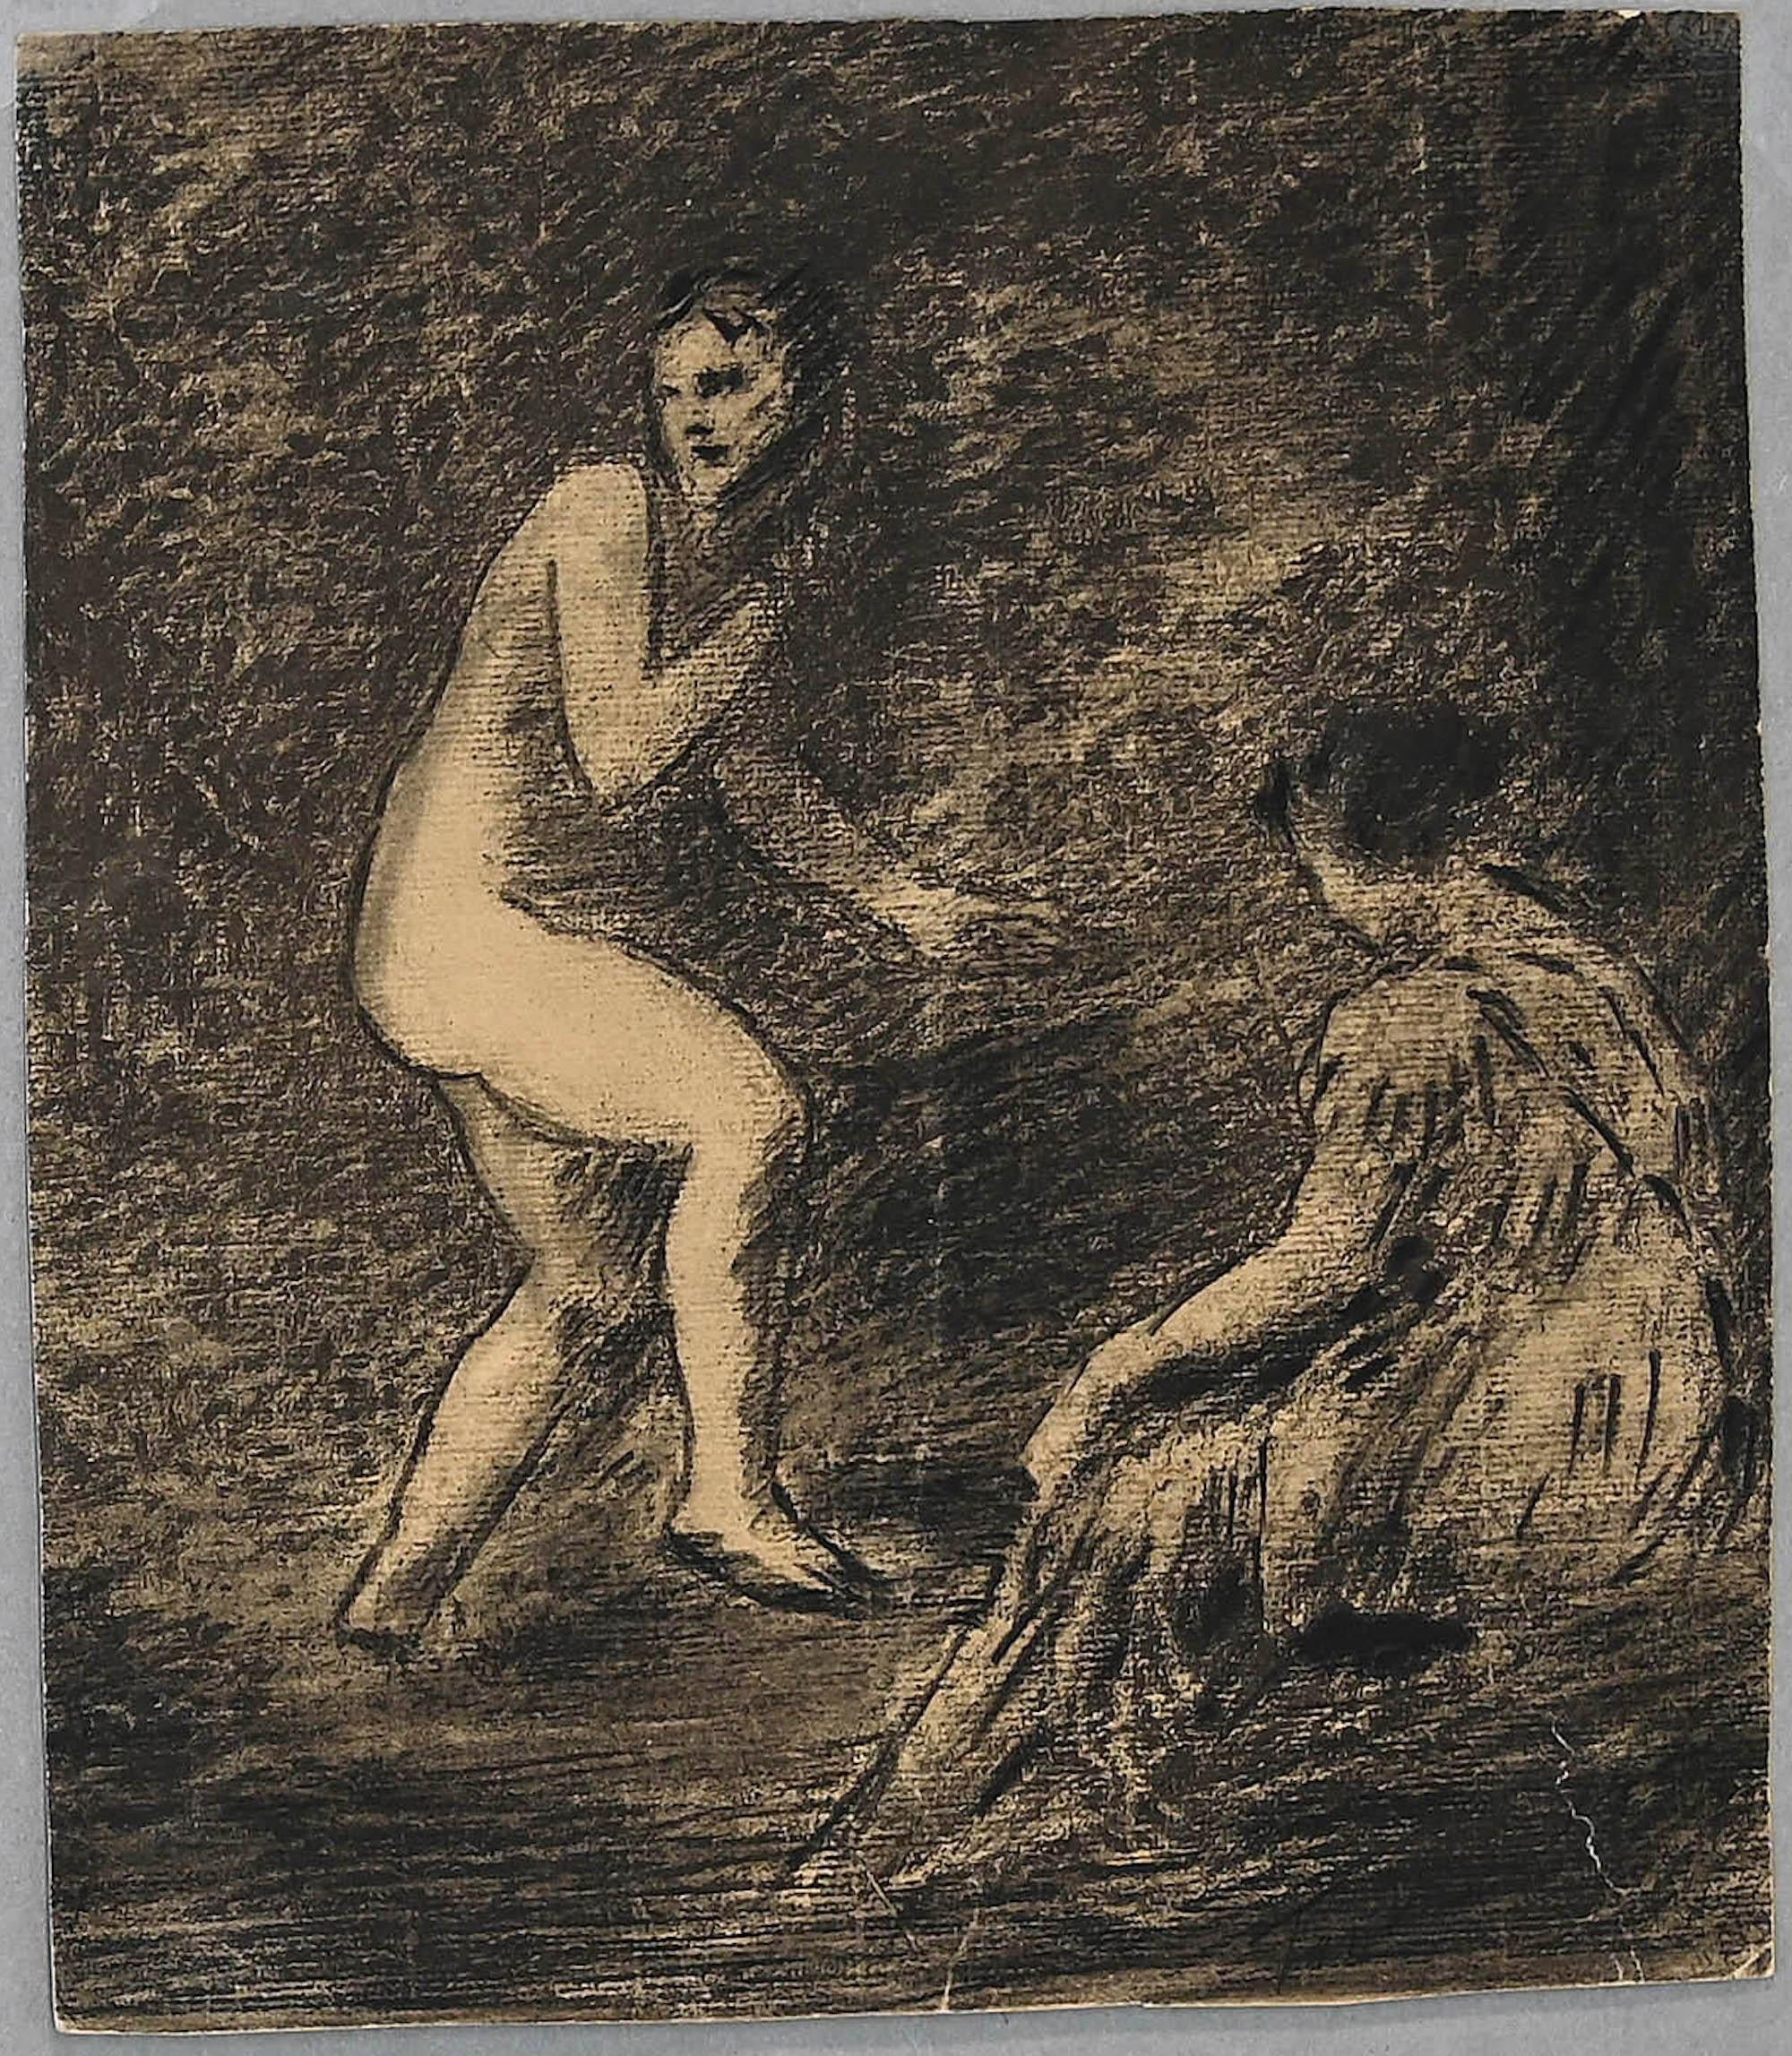 Nudes in the Woods - Pencil and Charcoal - 19th century - Art by Unknown